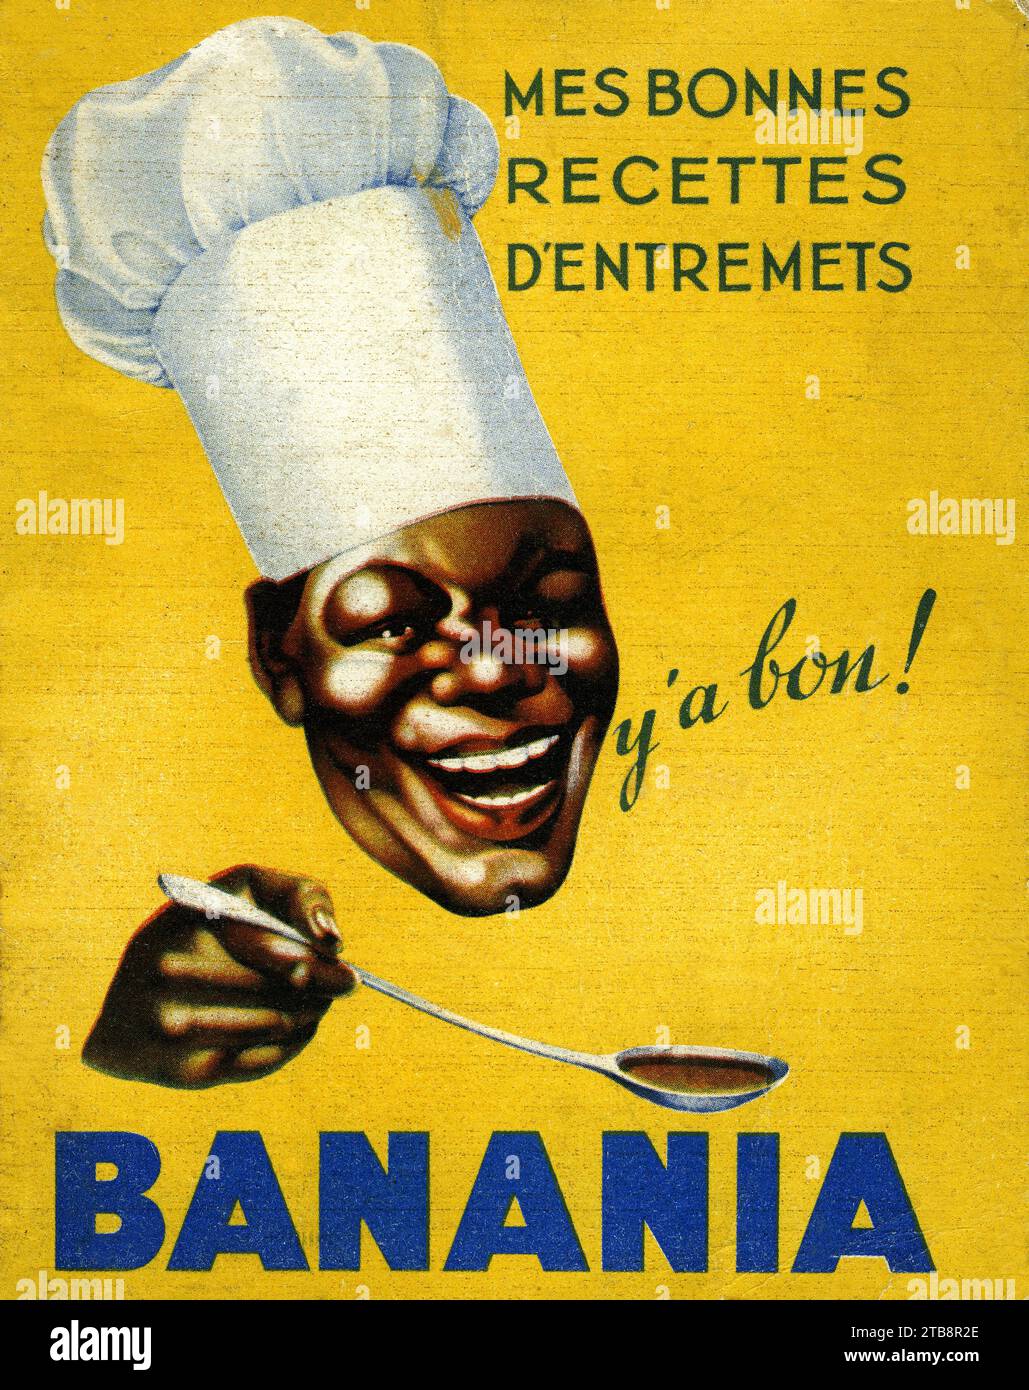 Banania, Y'a bon”: advertisement for the dessert recipes offered by the  chocolate breakfast brand Banania in the first half of the twentieth  century Stock Photo - Alamy